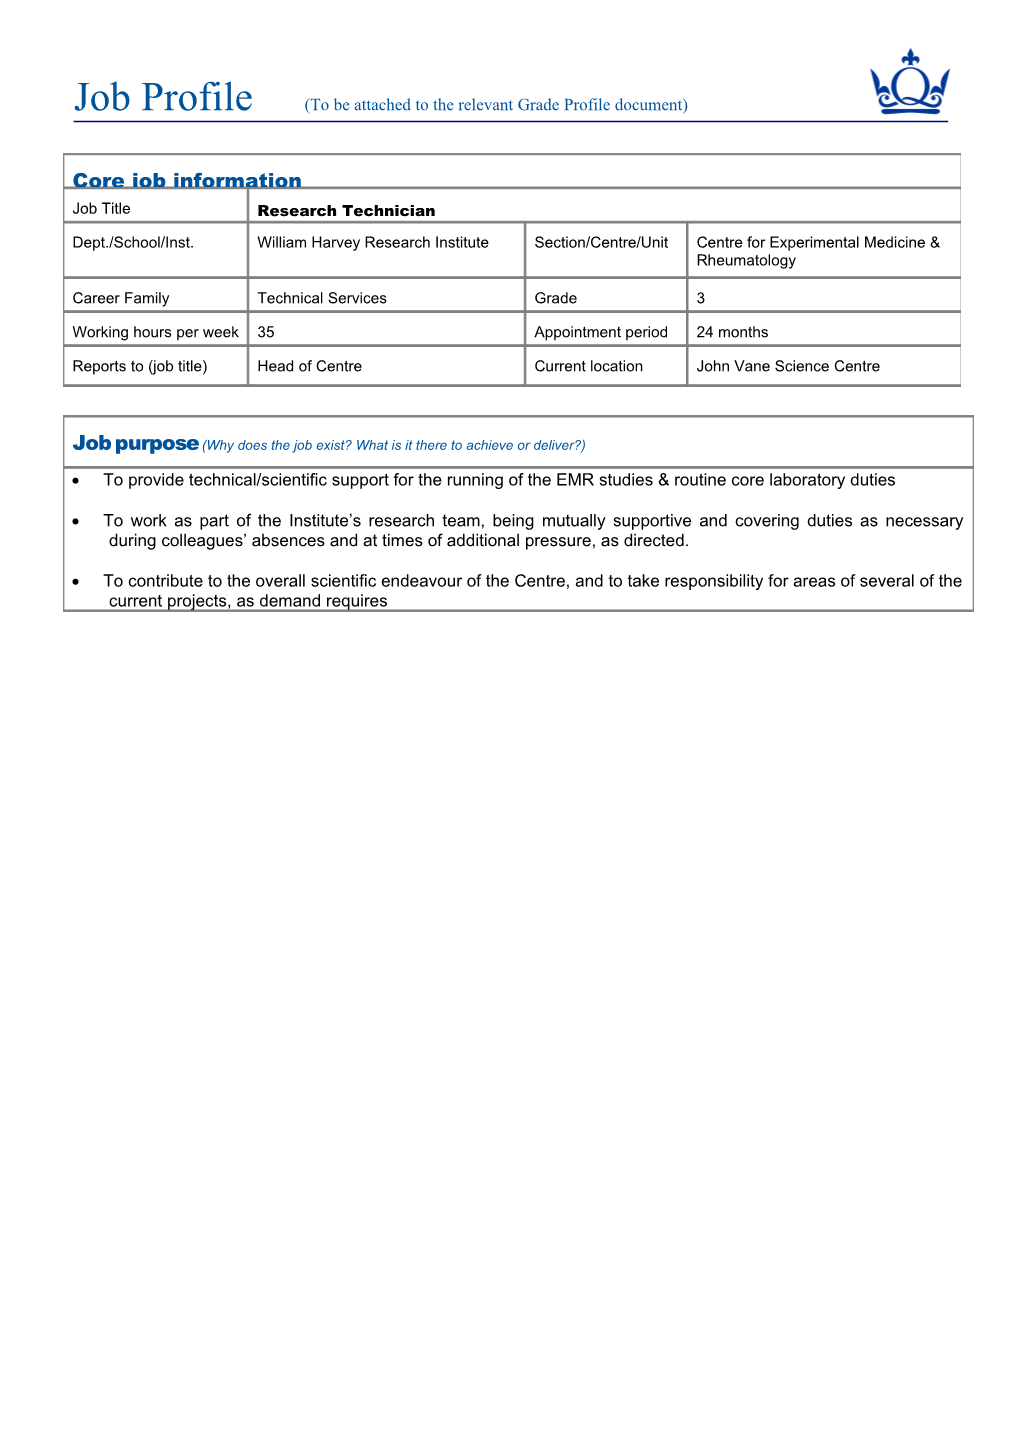 Job Profile (To Be Attached to the Relevant Grade Profile Document) s1